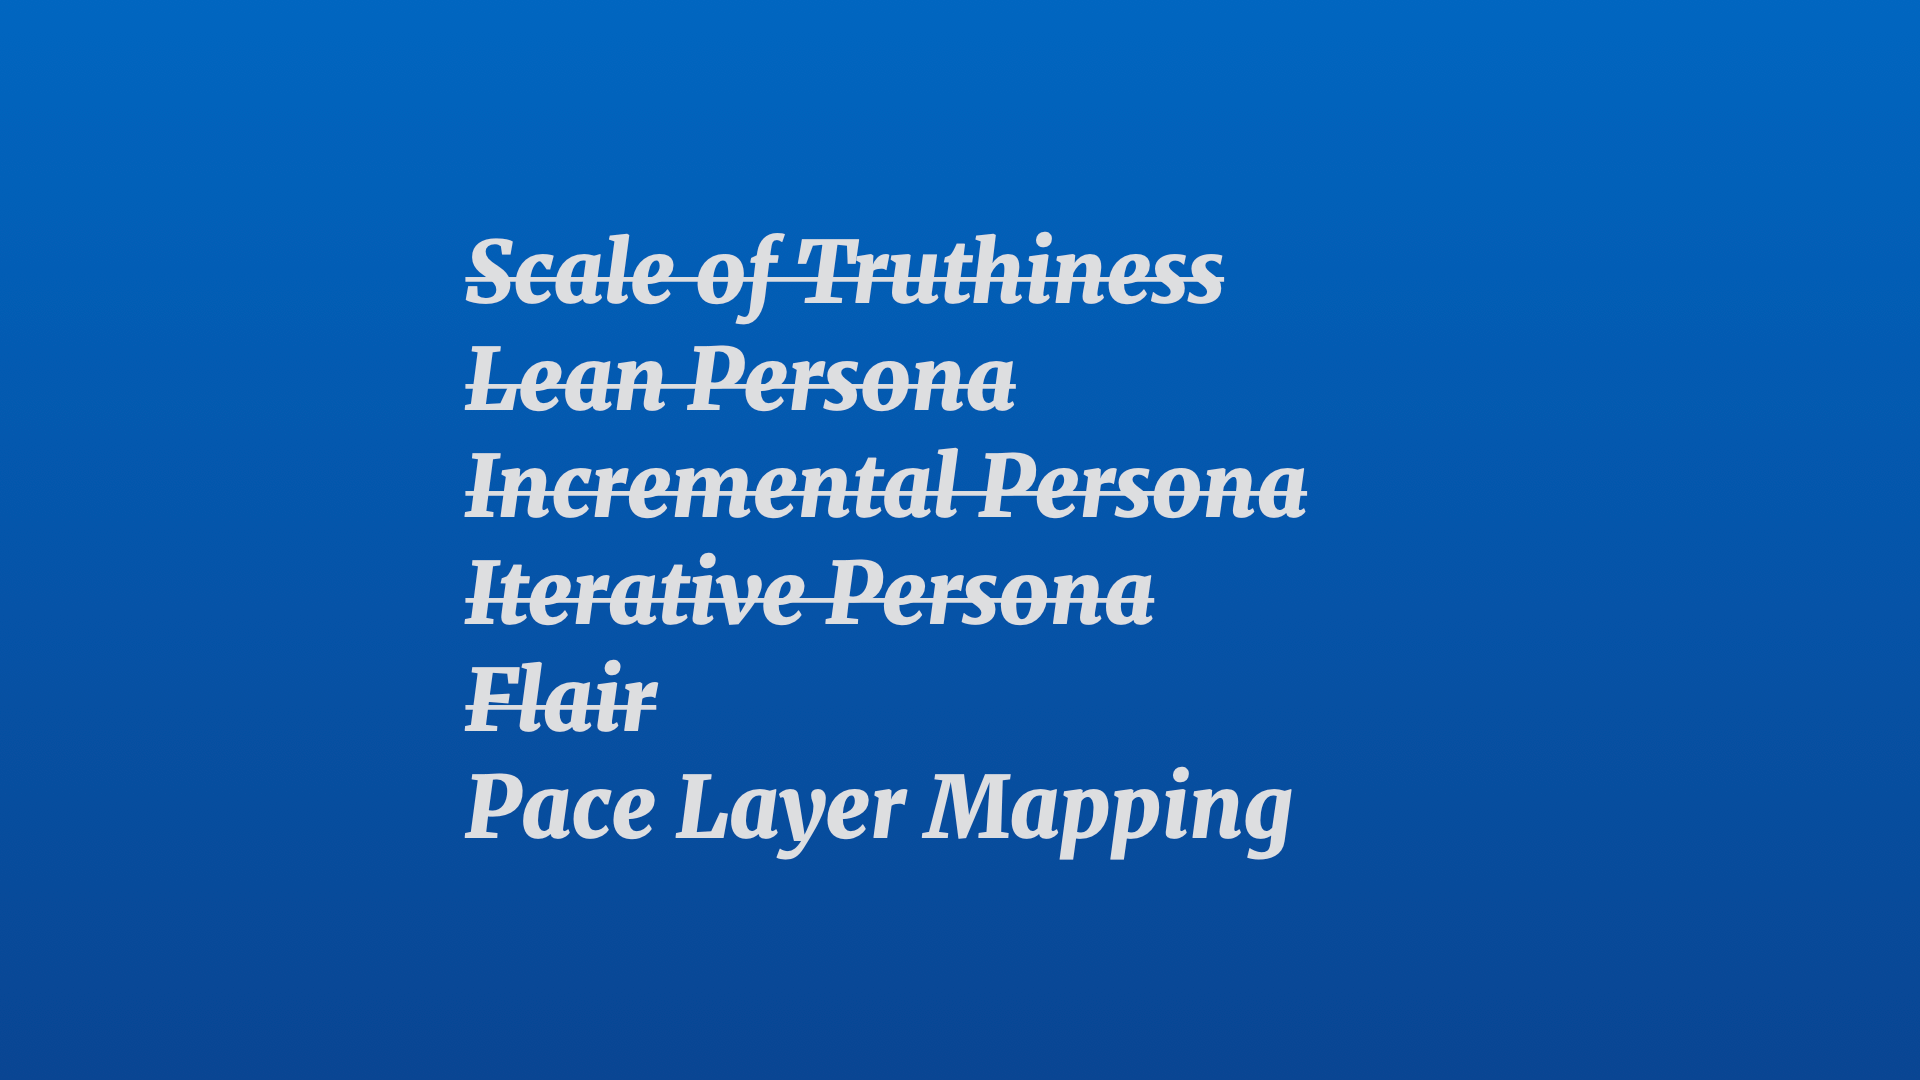 Text title: Pace Layer Mapping (underneath a list of old crossed out titles titles: 'Scale of Truthiness', 'Lean Persona', 'Incremental Persona', 'Iterative Persona', and 'Flair')